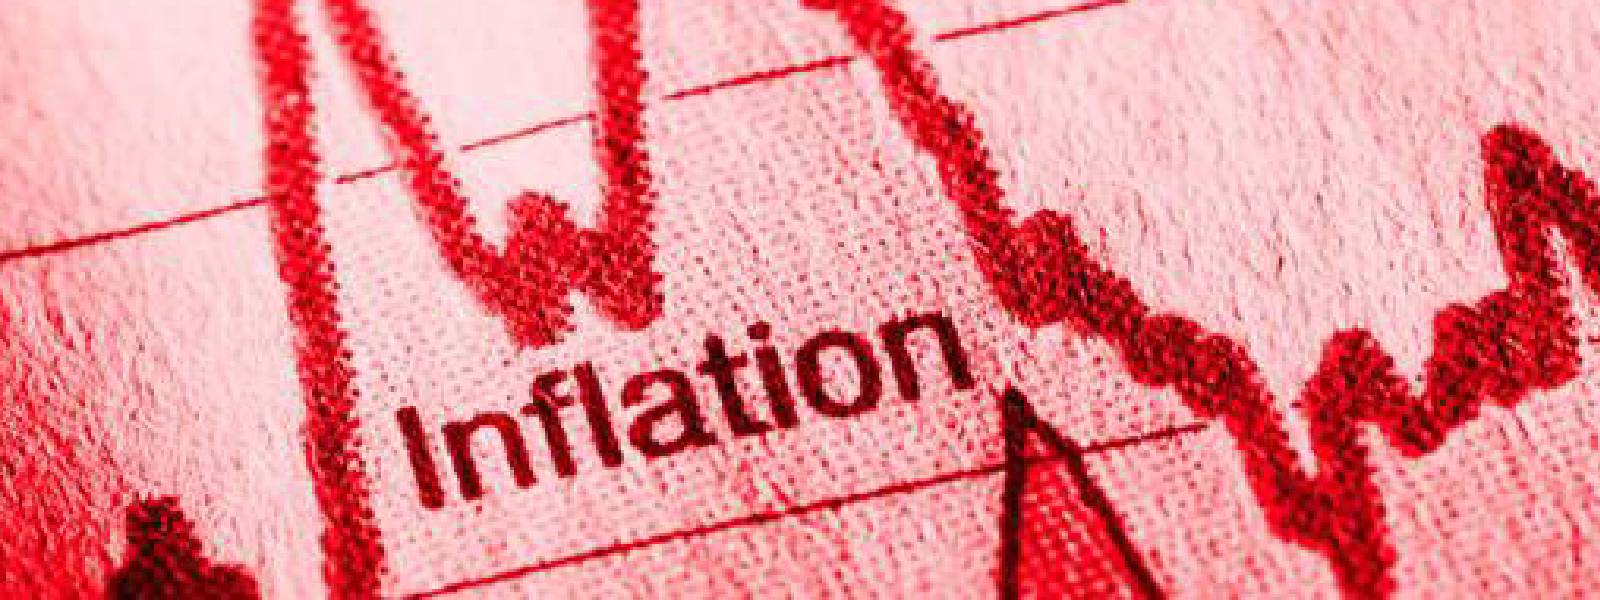 Inflation soars to 64.3% in August